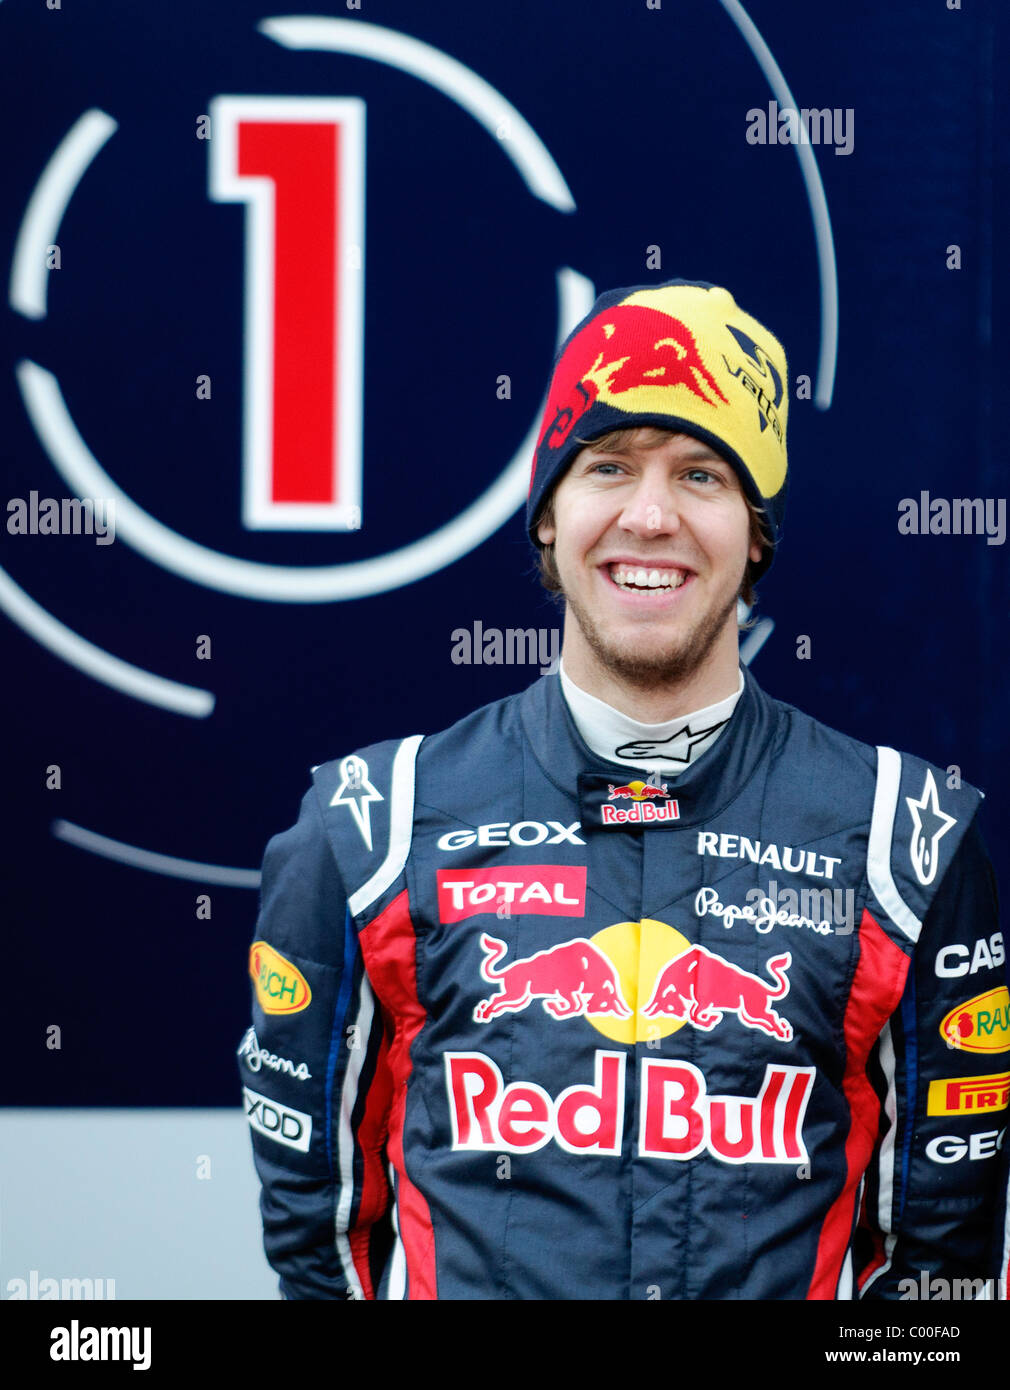 Sebastian Vettel High Resolution Stock Photography and Images - Alamy